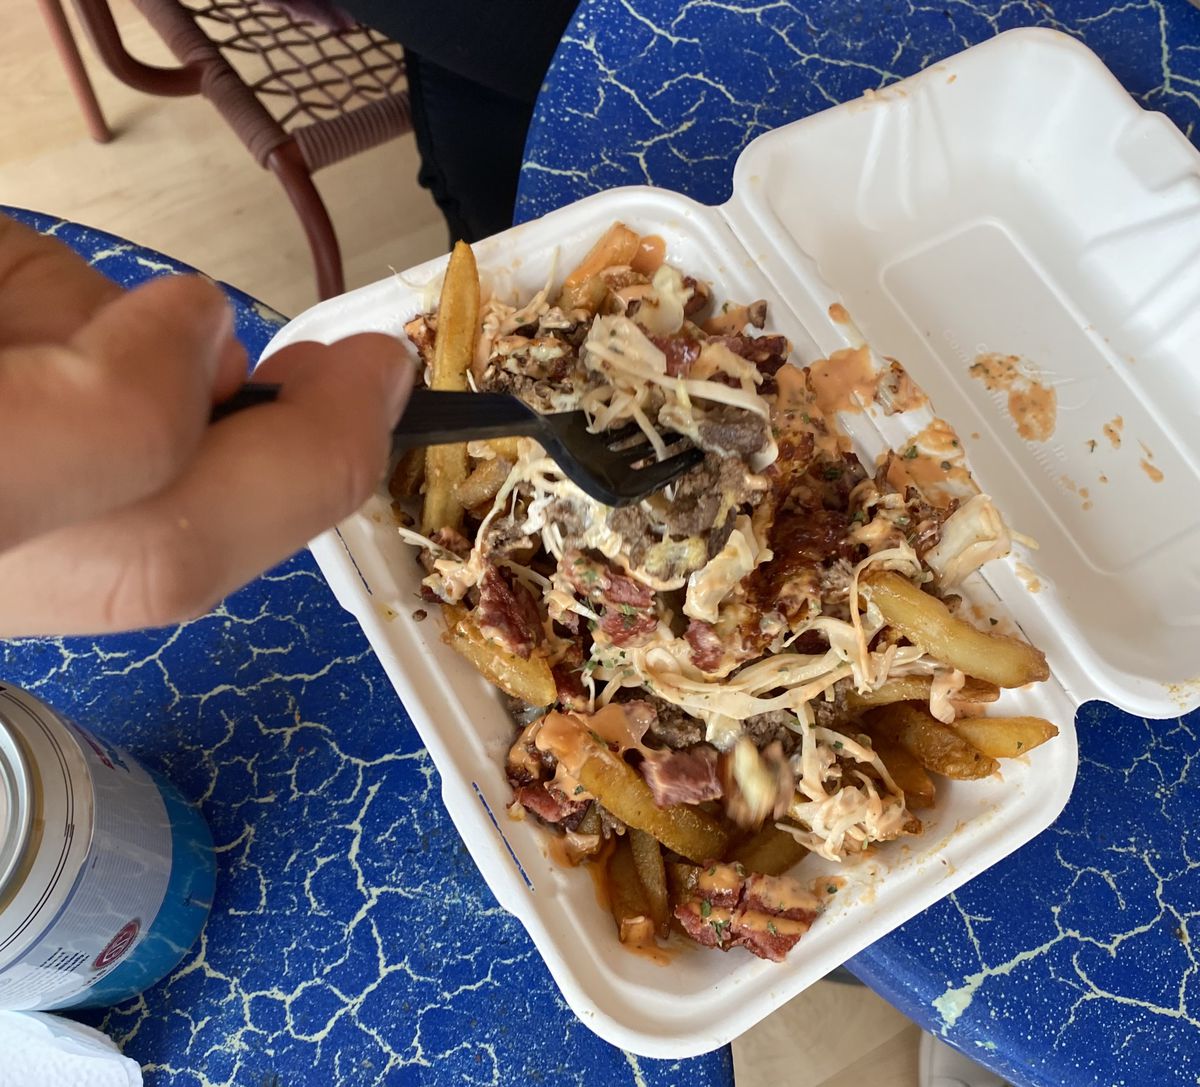 A white takeout container is loaded with crisp french fries topped with chopped cheese and salami.